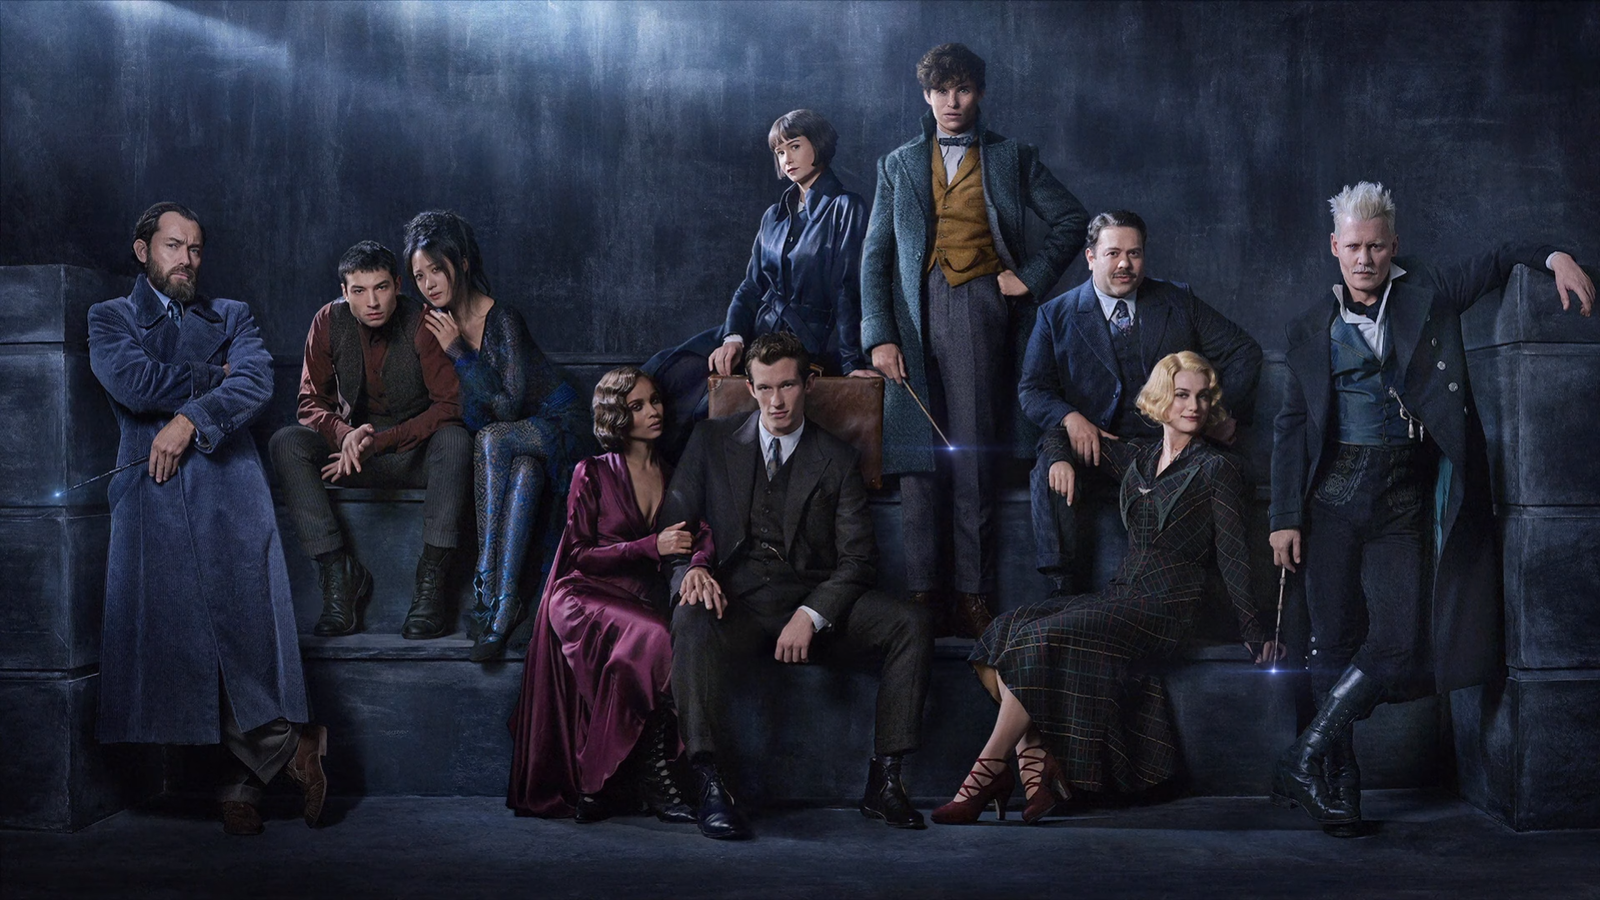 Fantastic Beasts sequel characters - Movies, Fantastic Beasts, Fantastic Beasts: The Crimes of Grindelwald, 